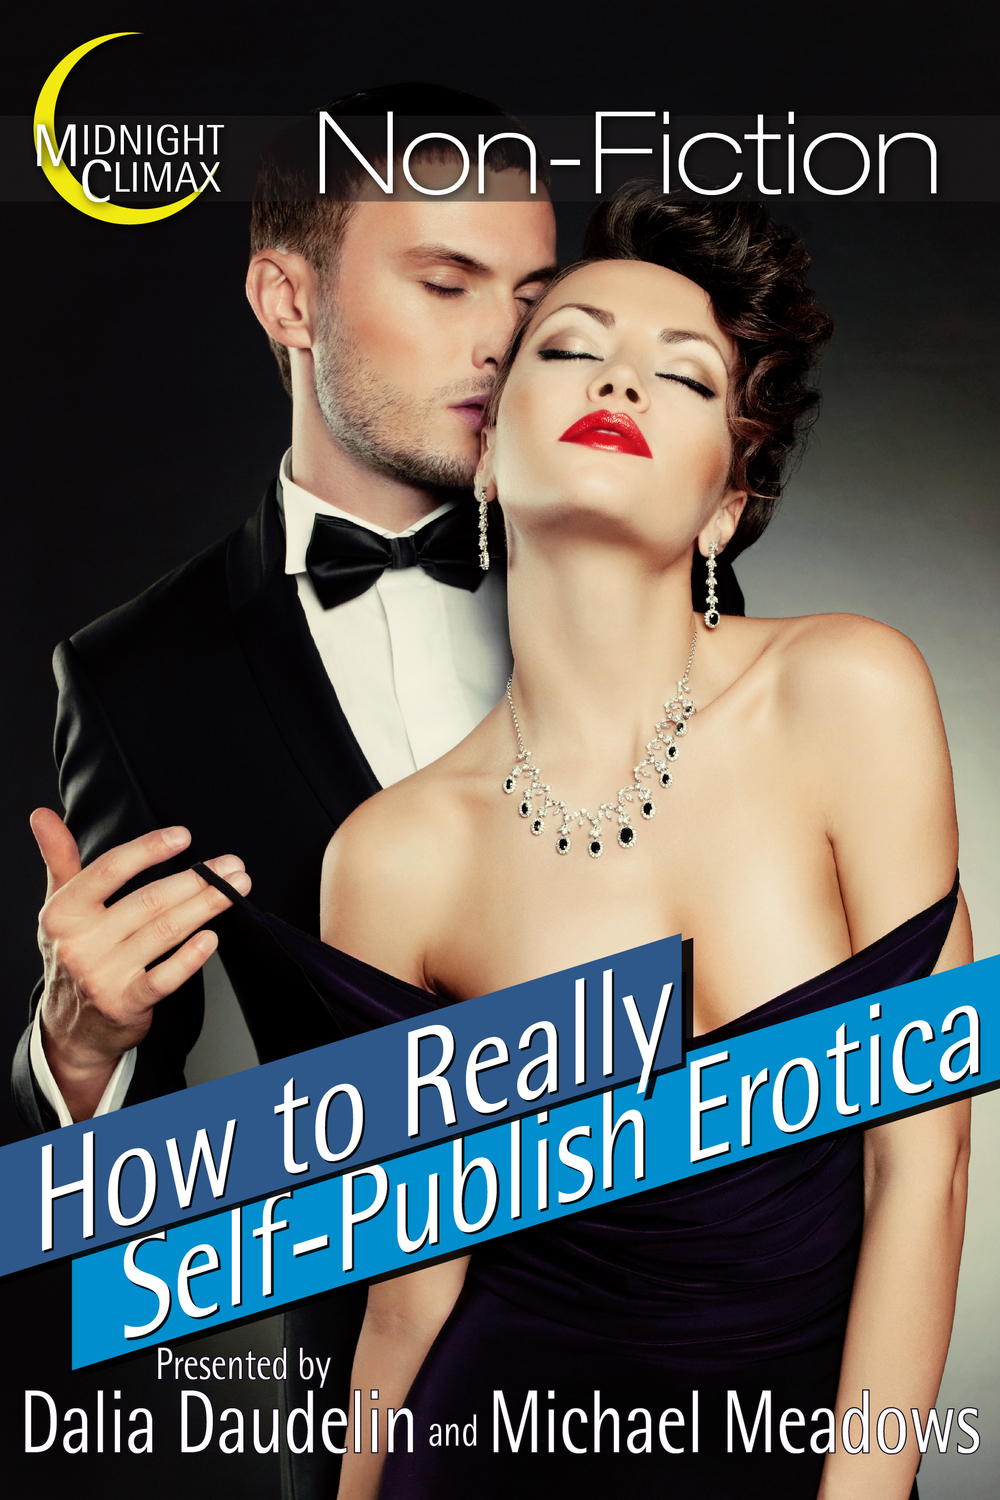 Self publish your own erotic stories! This book reveals secrets that other erotica authors don't want you to know.